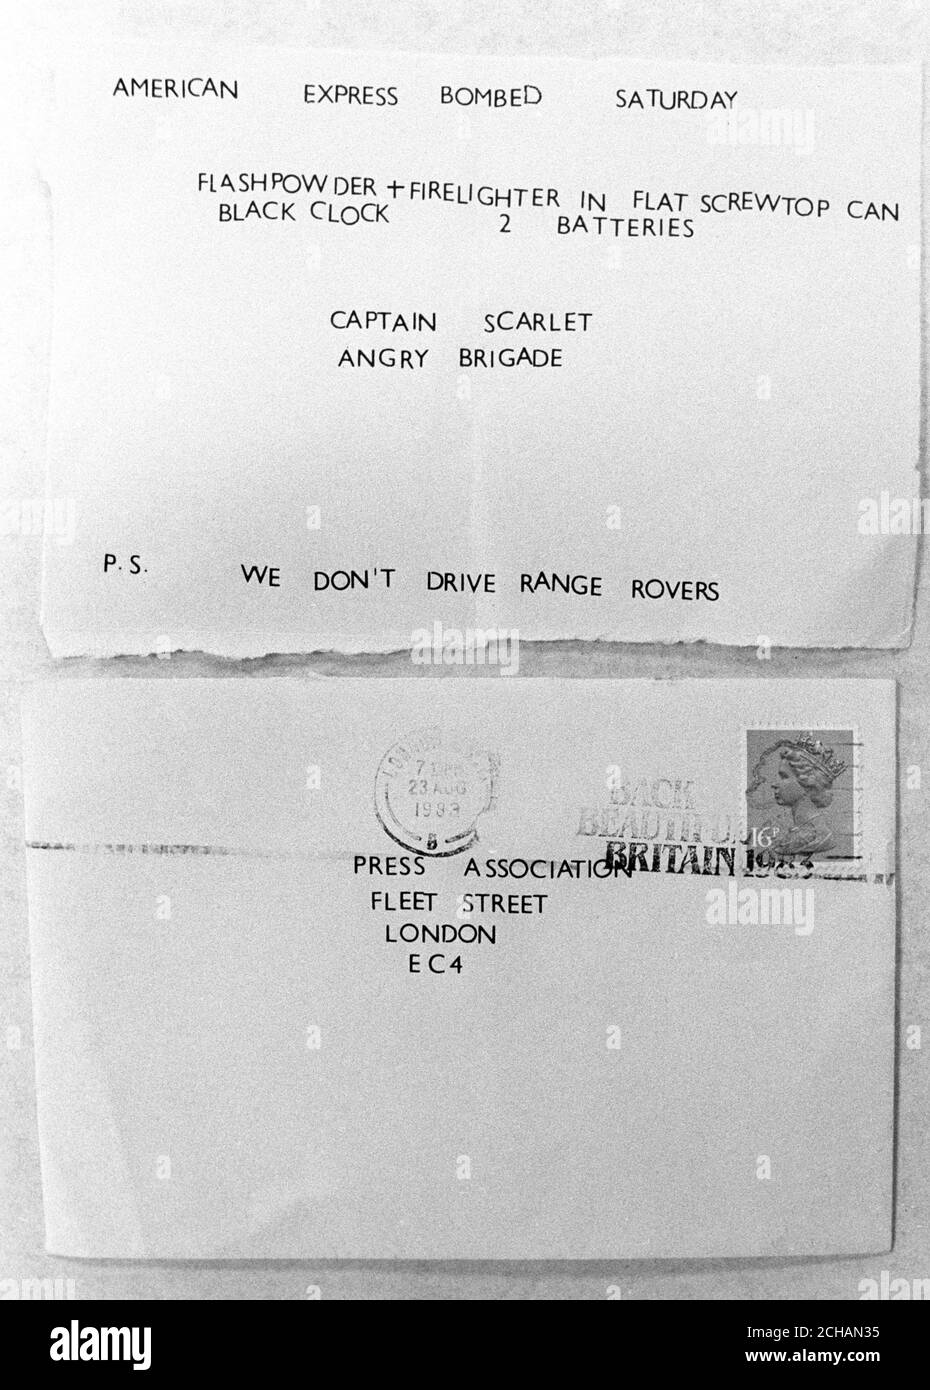 The Angry Brigade today claimed responsibility for the explosion on Saturday night at an office of the the American Express group in London. On this letter, received at the Fleet Street office of the Press Association, a member of the Brigade - signing himself as 'Captain Scarlet' - indicated his organisation had planned the blast. Stock Photo